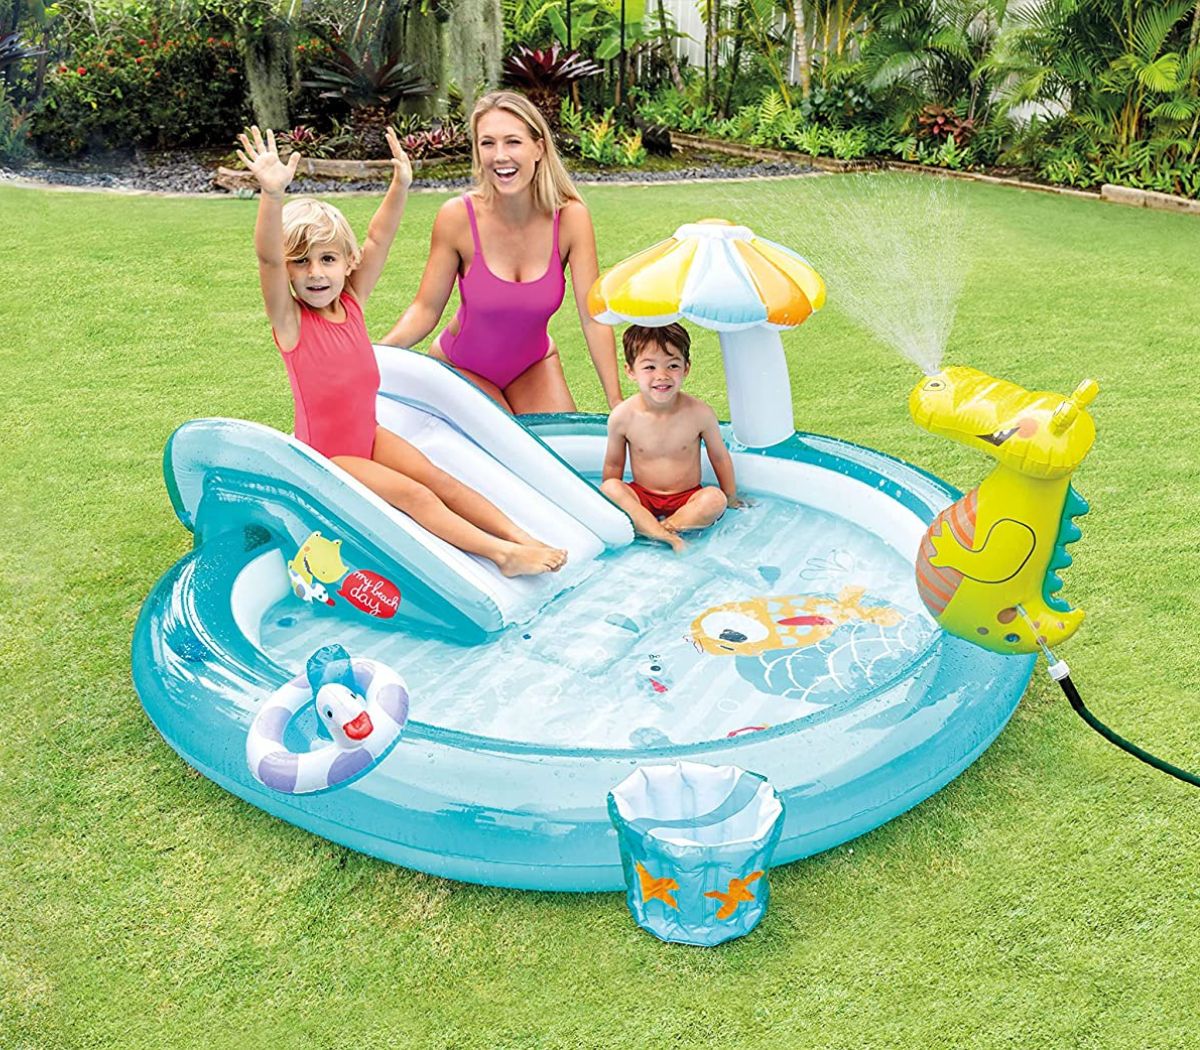 Intex Swim center family inflatable pool featuring gator with mom and two kids playing 